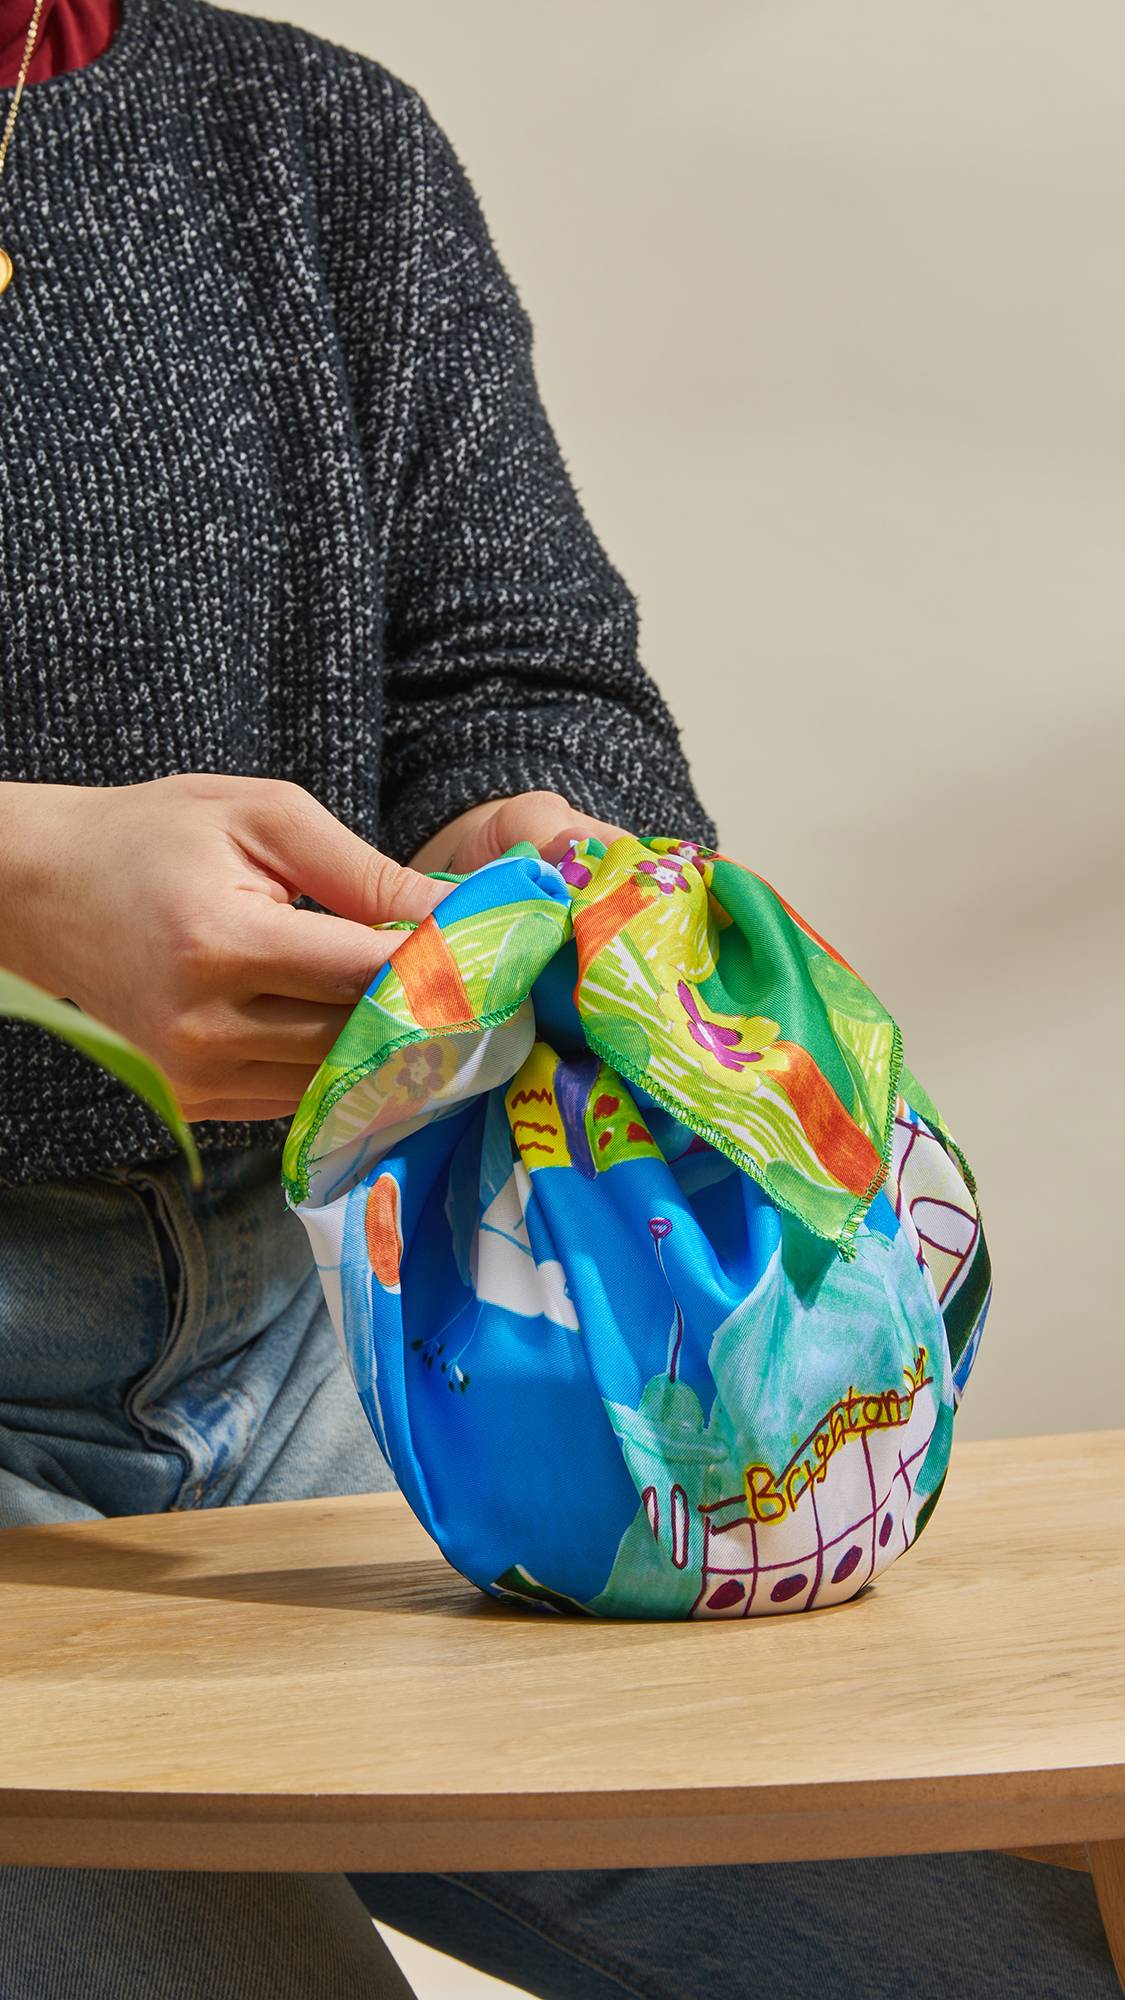 The image shows the model's hands as they stand at a counter and neatly tie the By The Seasing knot wrap around a gift.